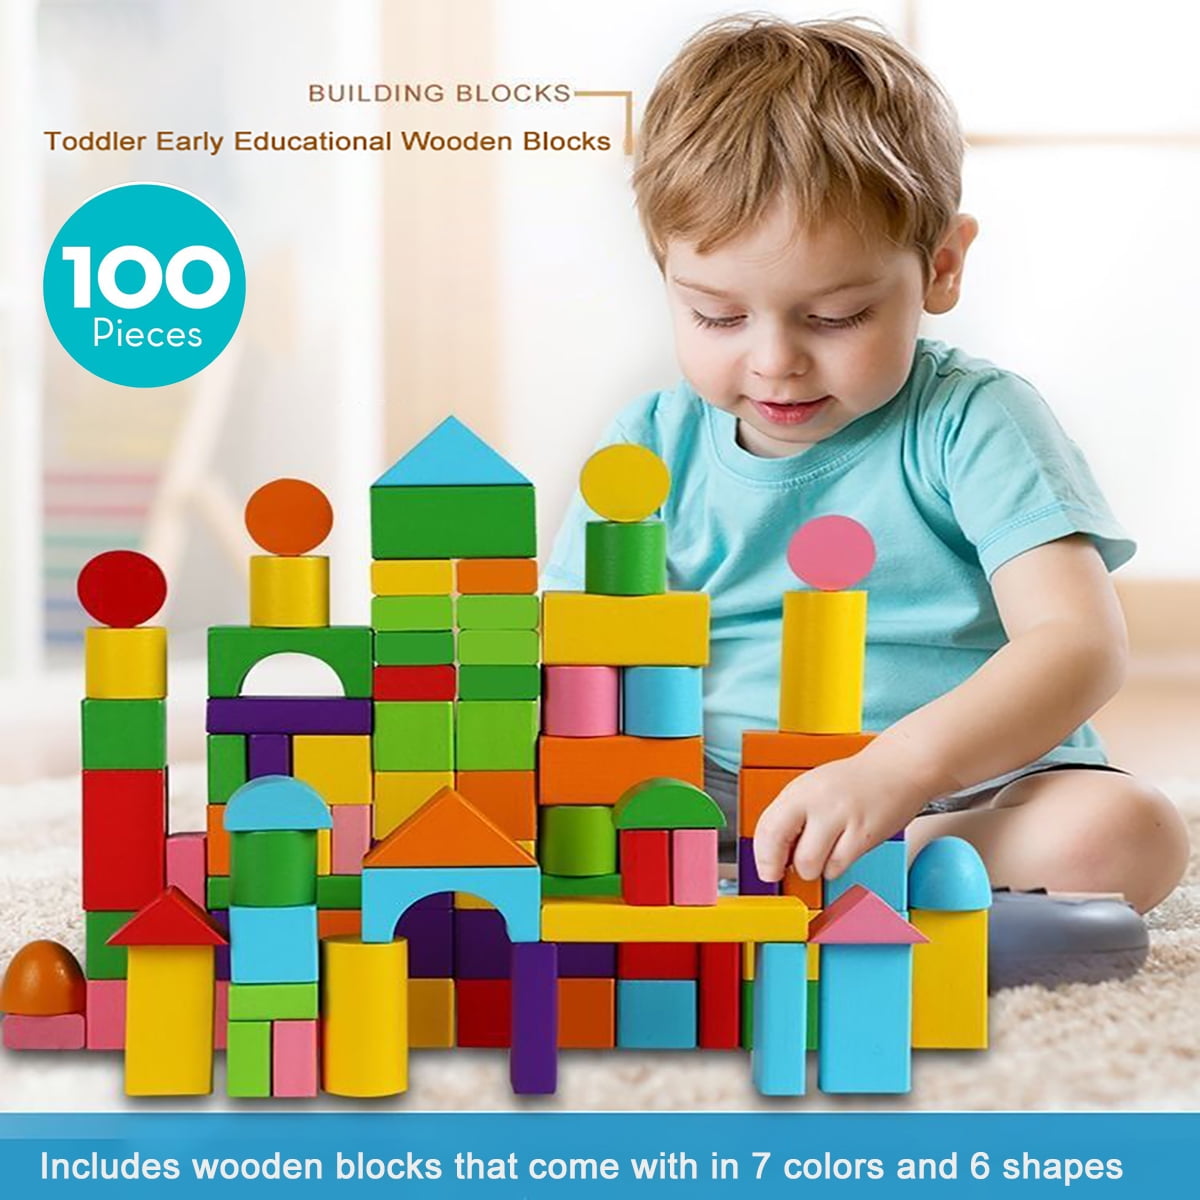 100 Pcs Wooden Blocks for Toddler, Multi-Colore Wooden Building Blocks, Educational Assembly Construction Building Toys Stacking Game for Kids